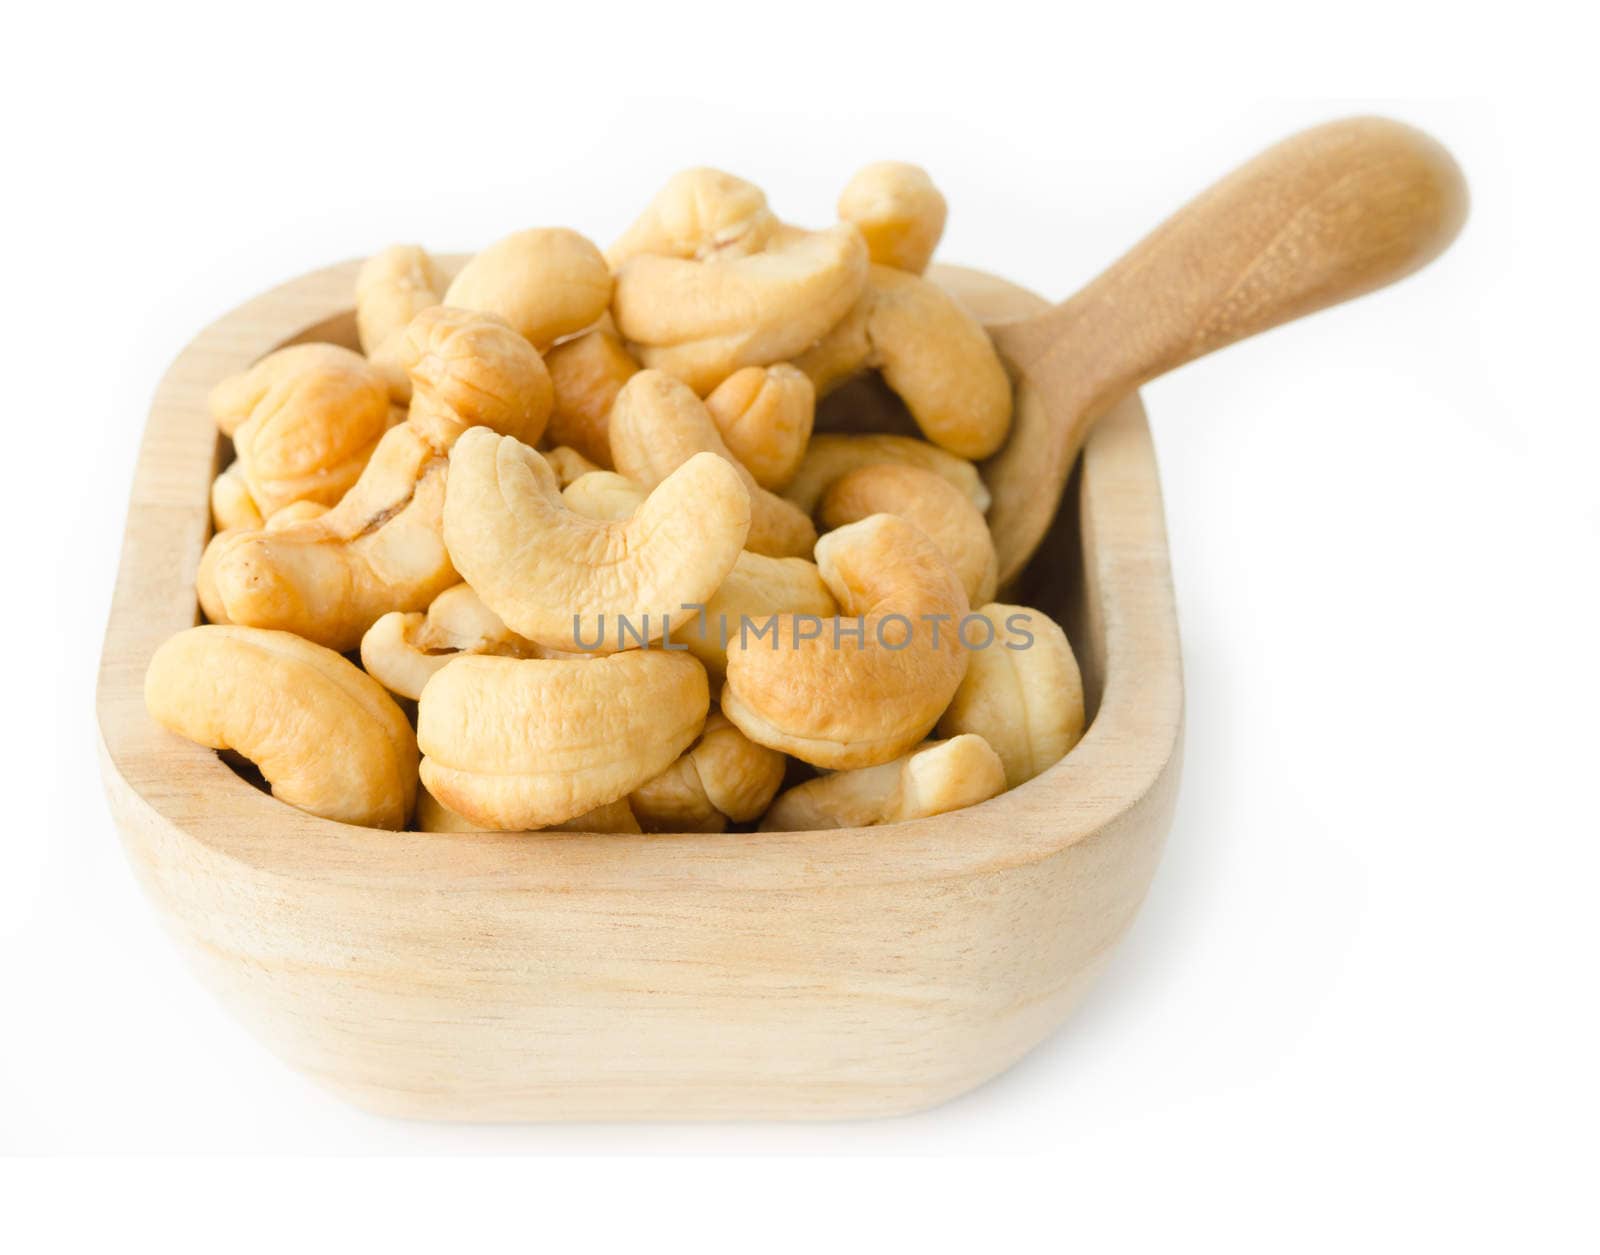 Cashew nuts in wooden bowl on white background.